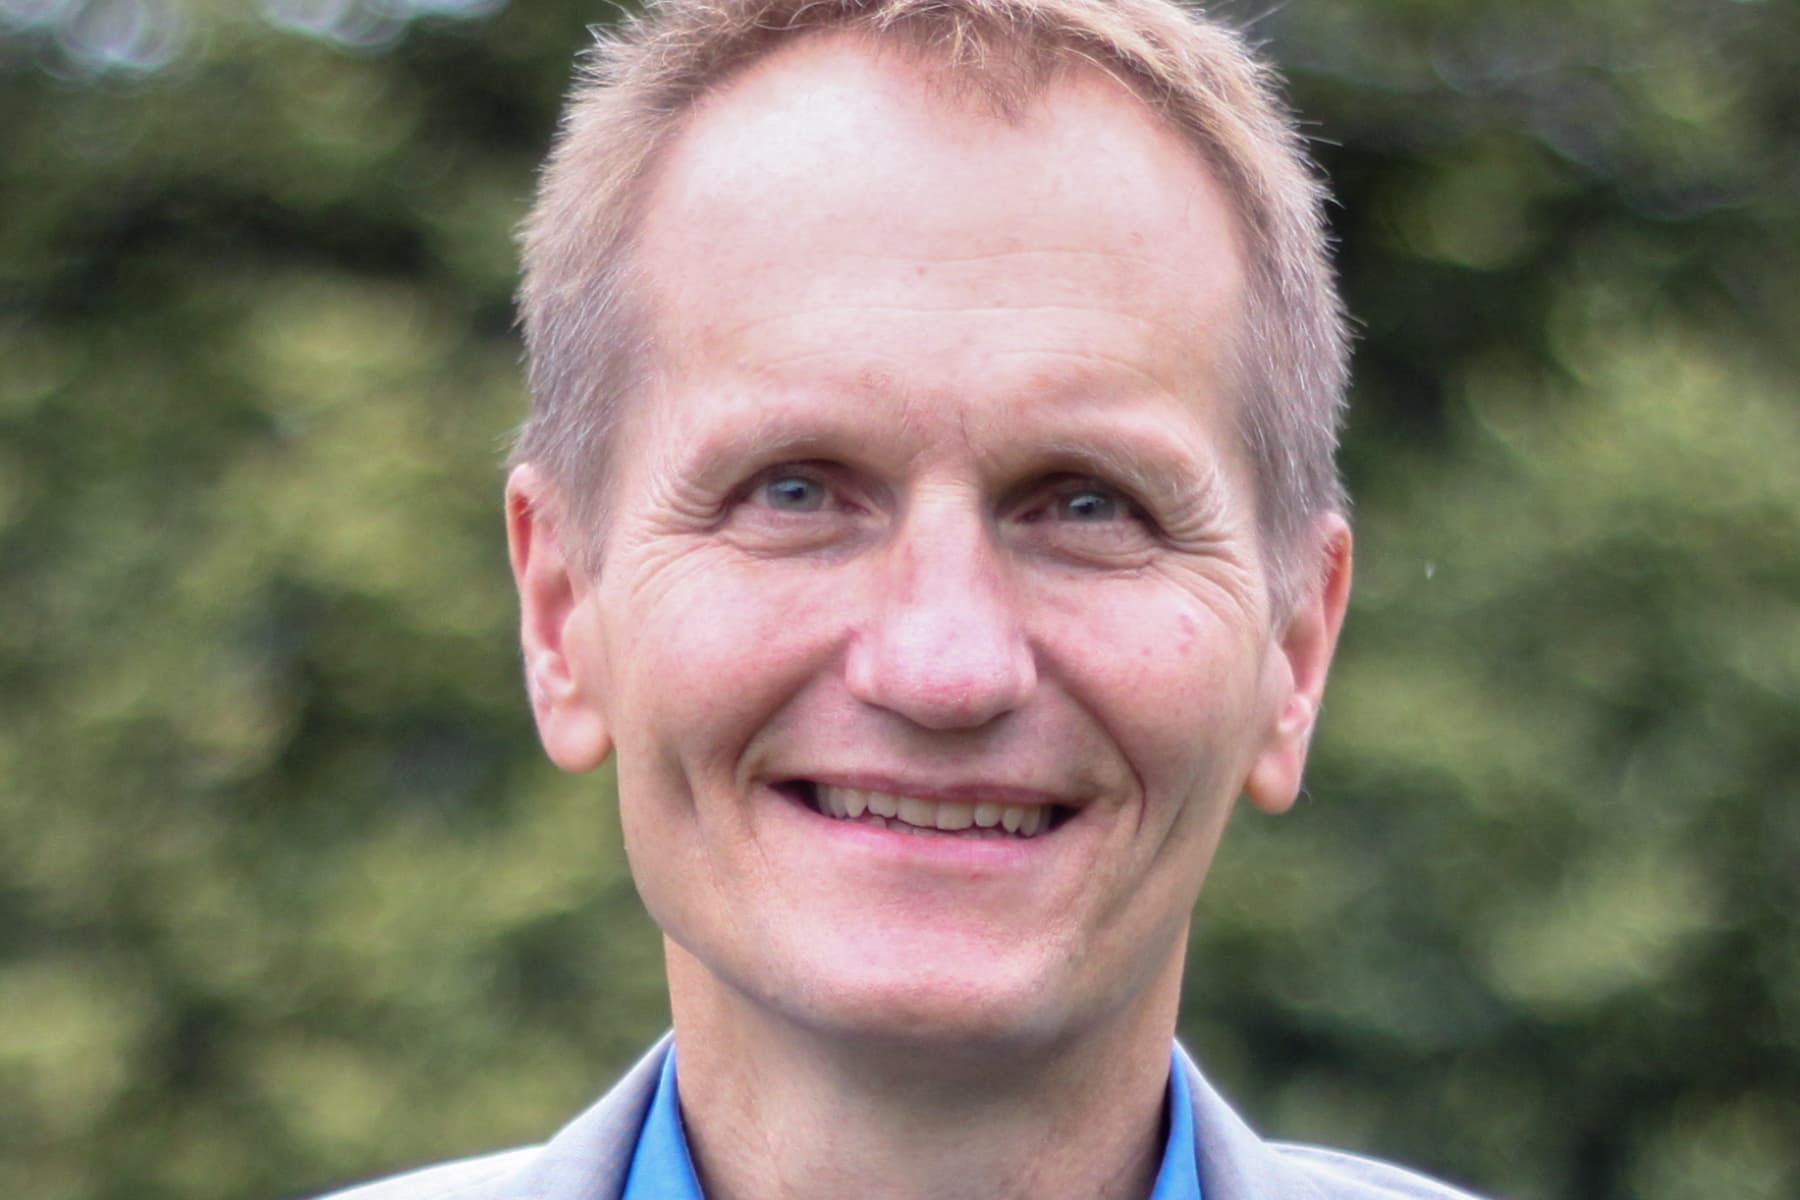 Prof. Dr. Sven Reinecke – Director of the Institute of Marketing at the University of St. Gallen (HSG).